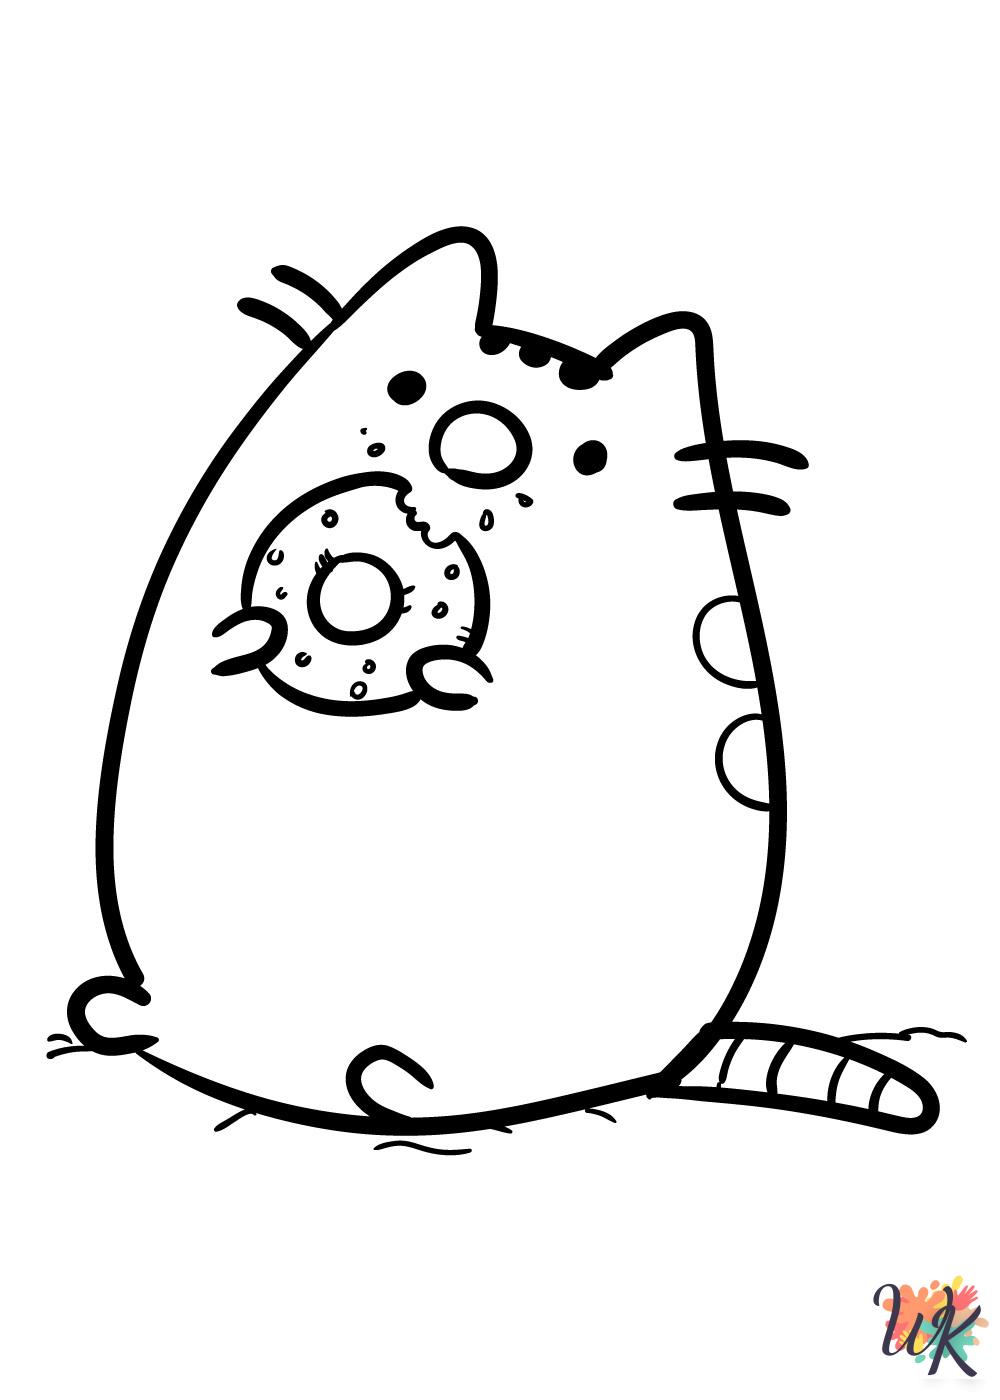 Pusheen coloring pages for preschoolers